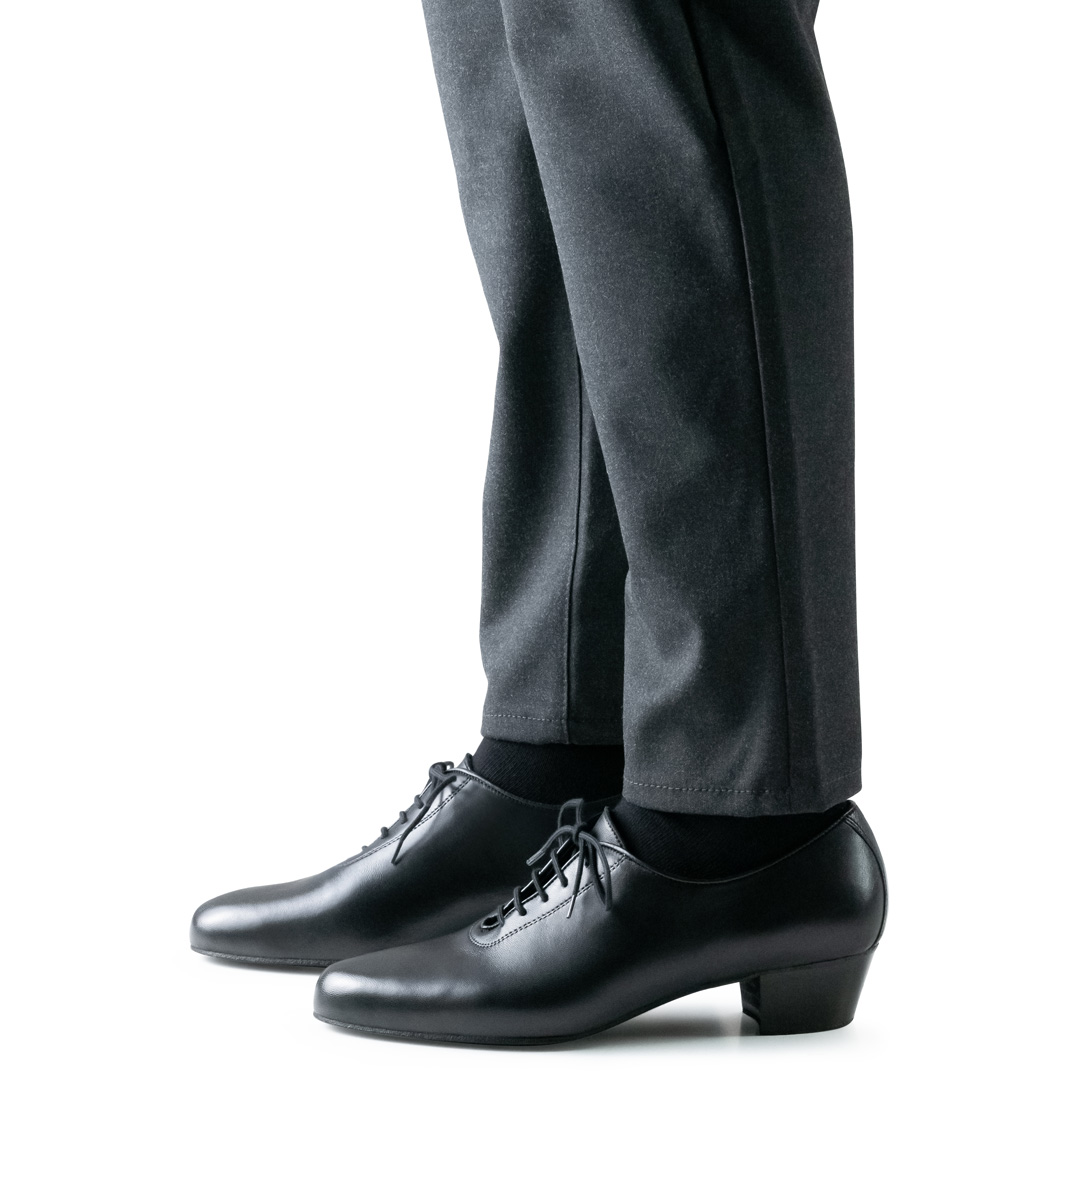 Grey trousers in combination with Werner Kern men's dance shoe with 4 cm heel height